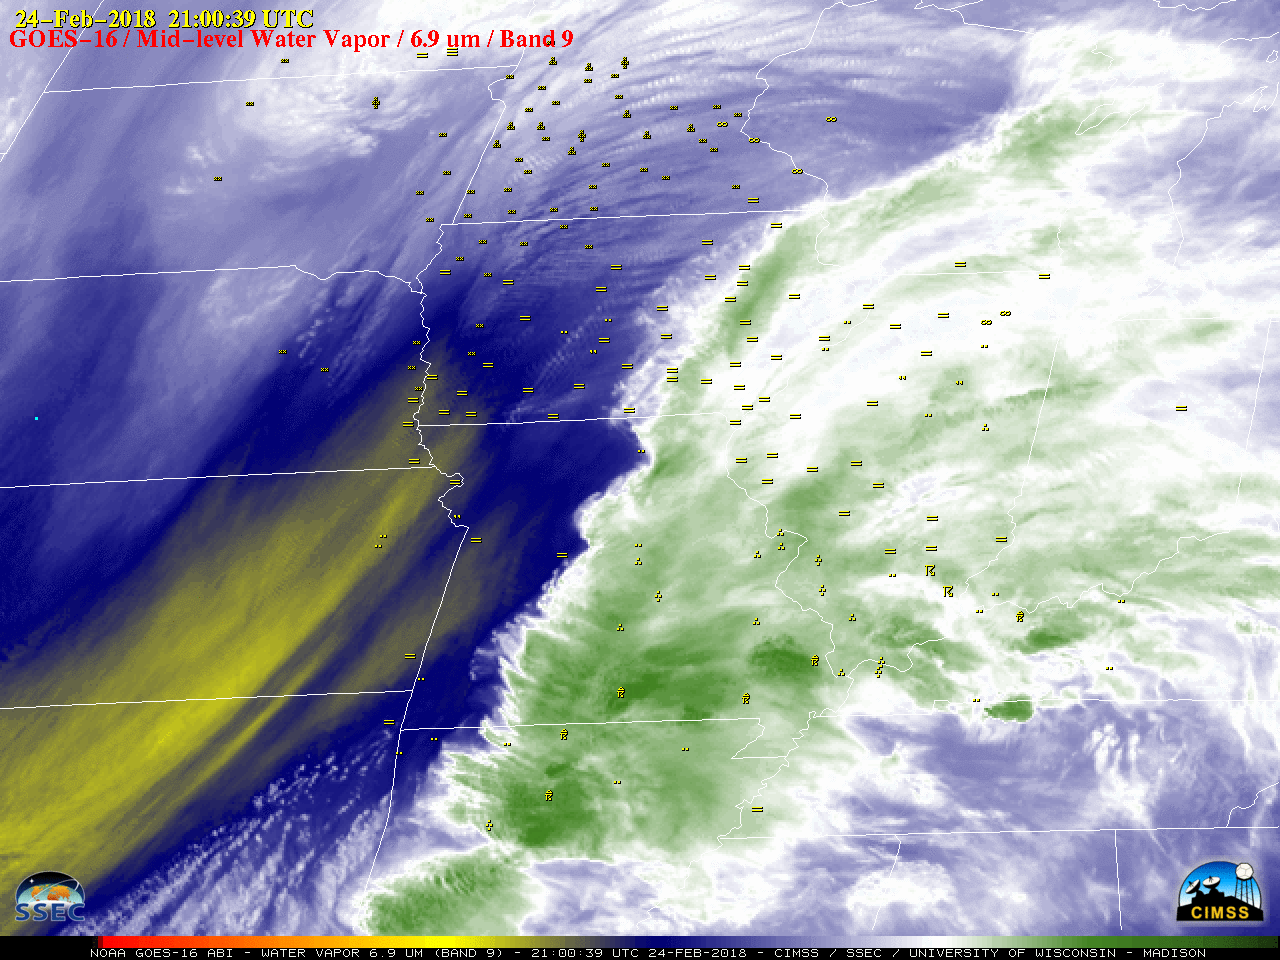 GOES-16 Mid-level Water Vapor (6.9 µm), with hourly plots of surface weather type [click to play Animated GIF | MP4 also available]